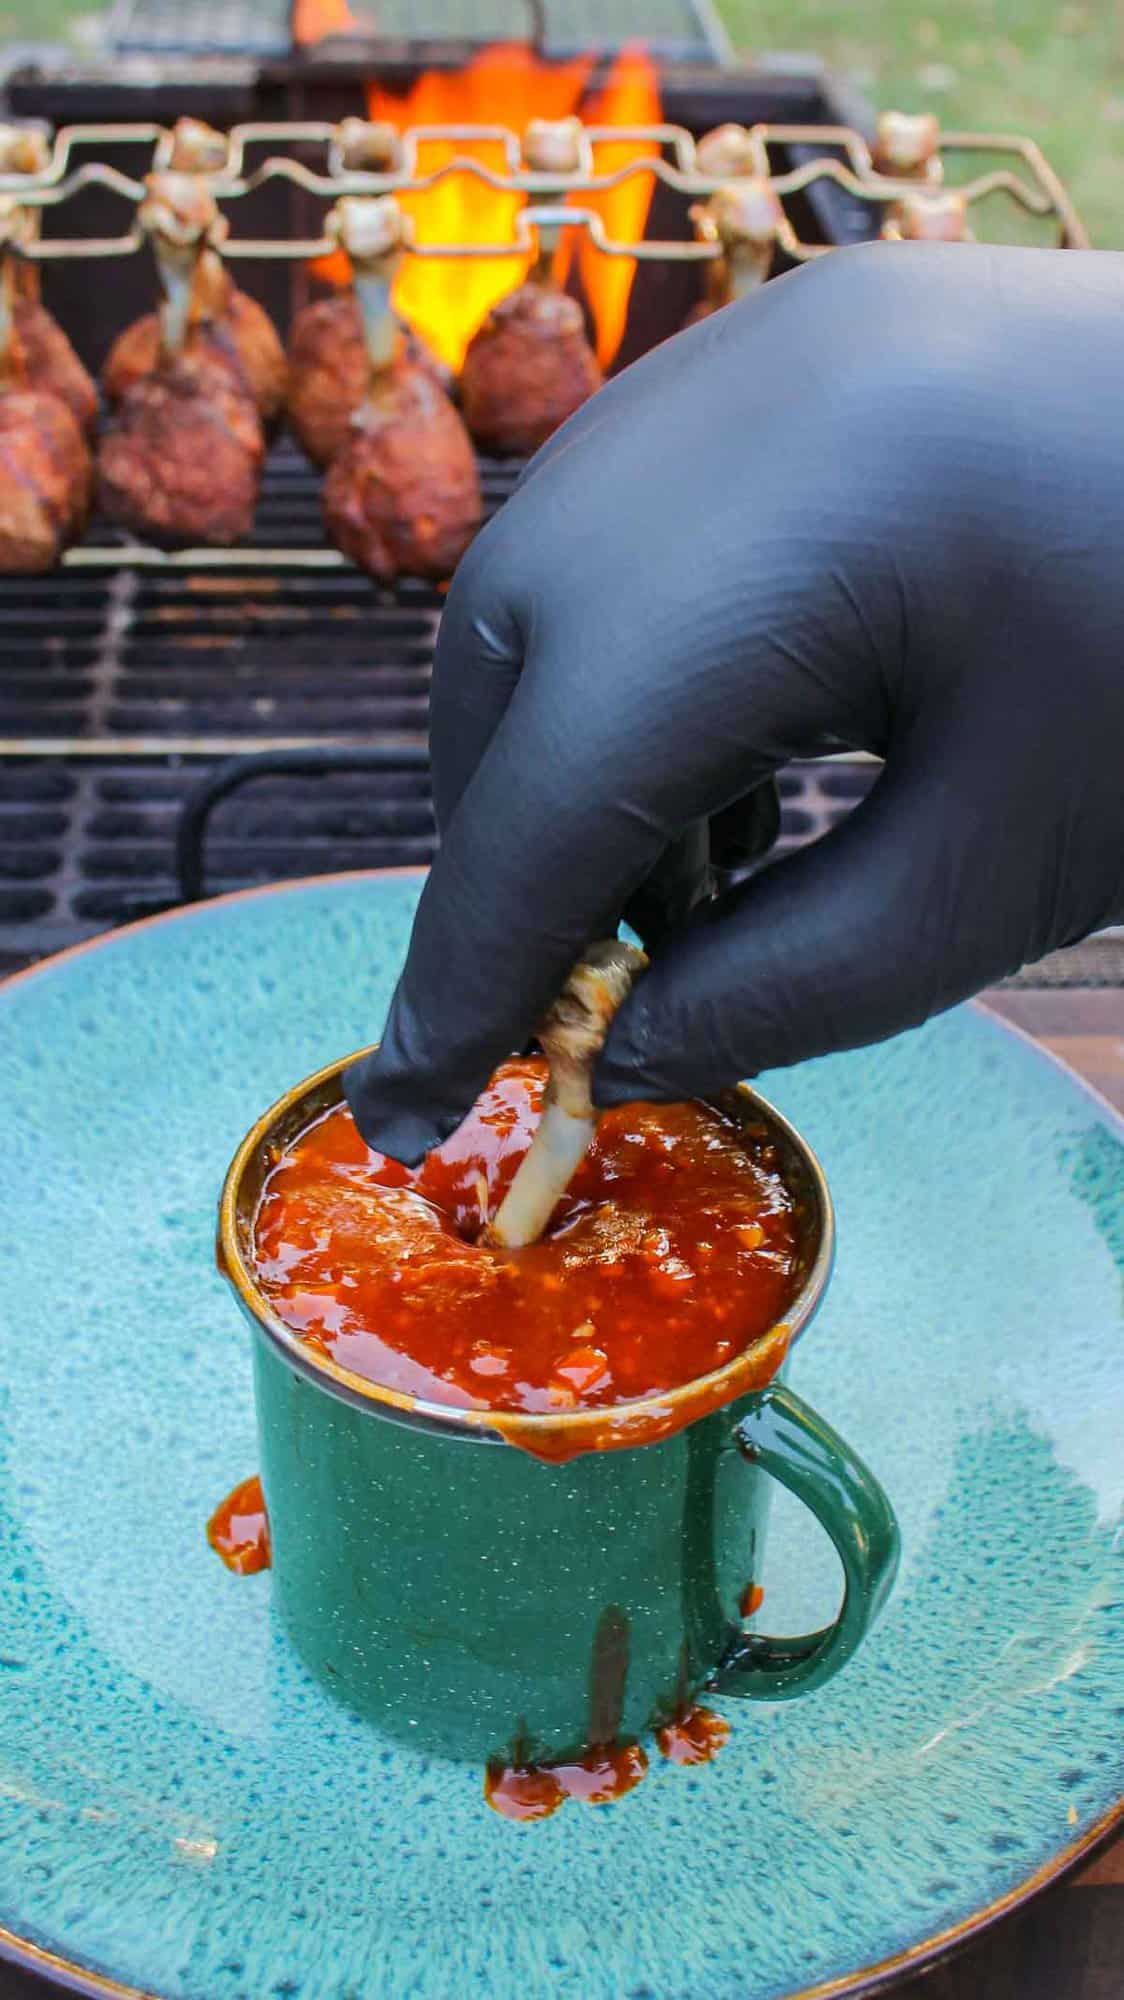 The lollipop being dunked into the garlic buffalo sauce.